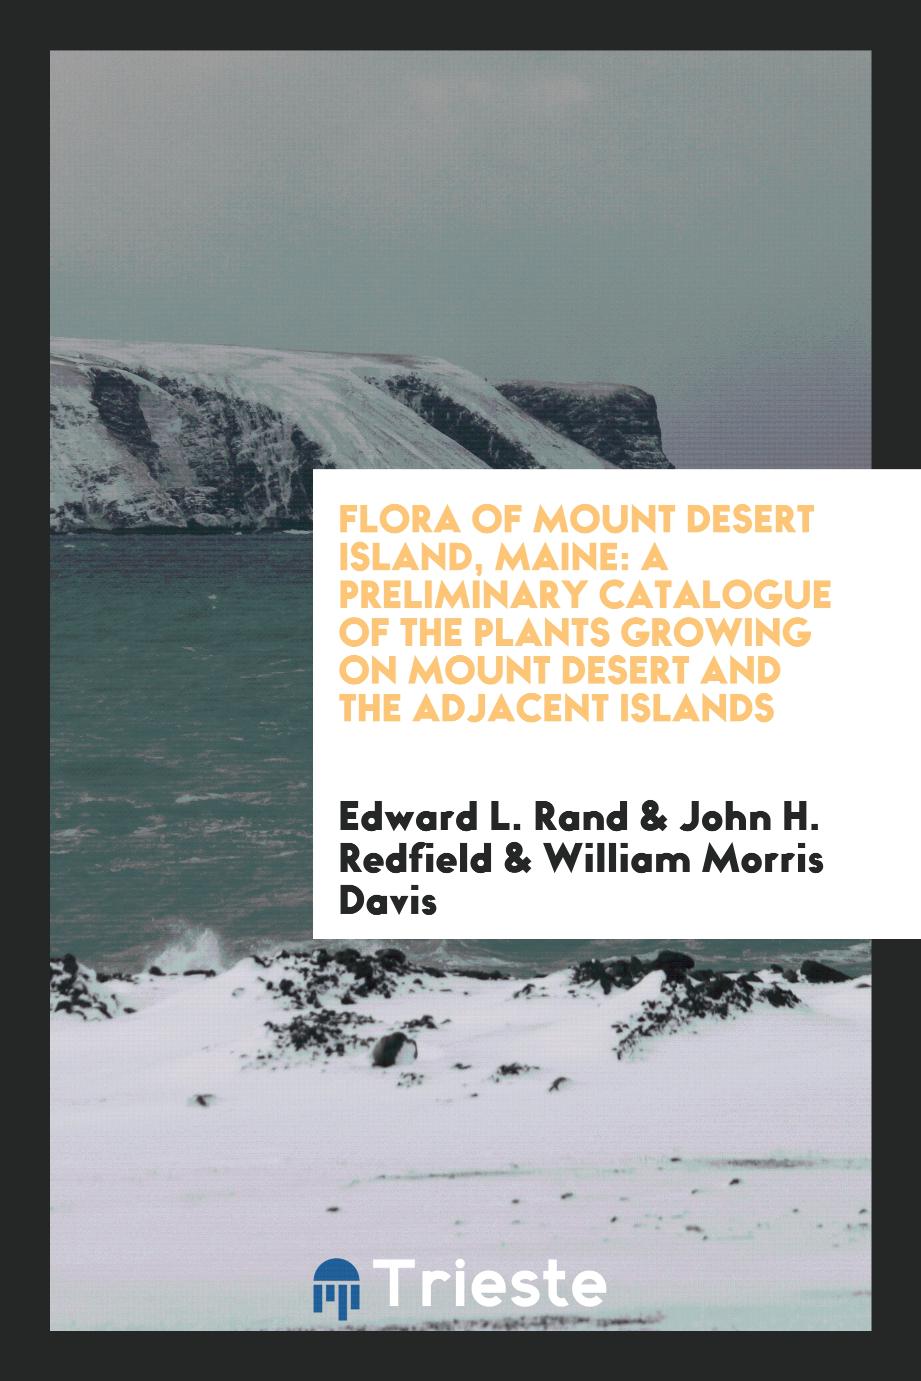 Flora of Mount Desert Island, Maine: a preliminary catalogue of the plants growing on Mount Desert and the adjacent islands